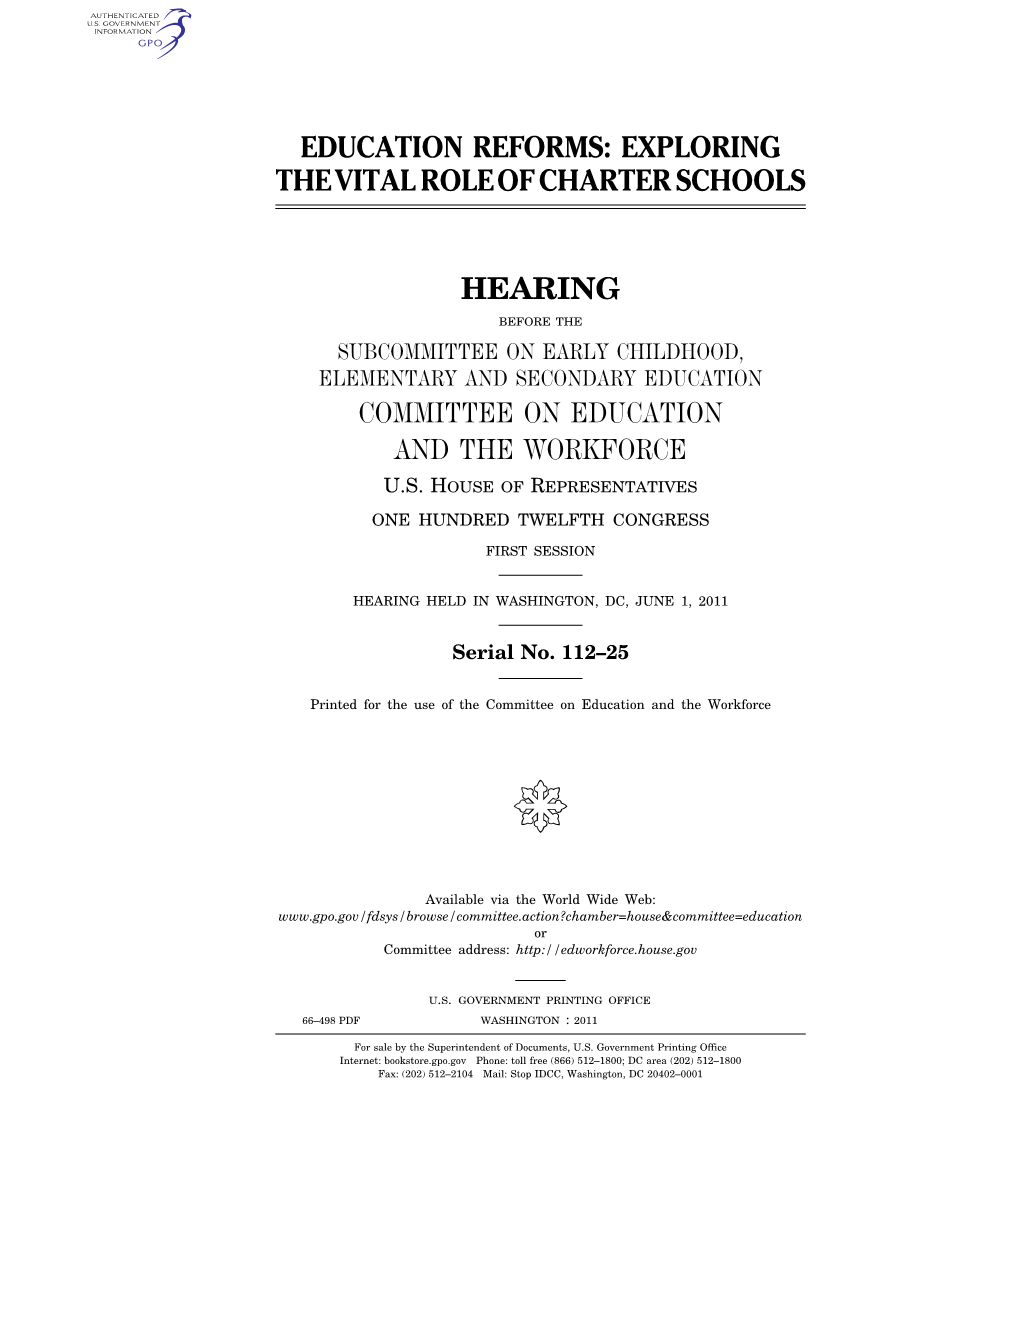 Exploring the Vital Role of Charter Schools Hearing